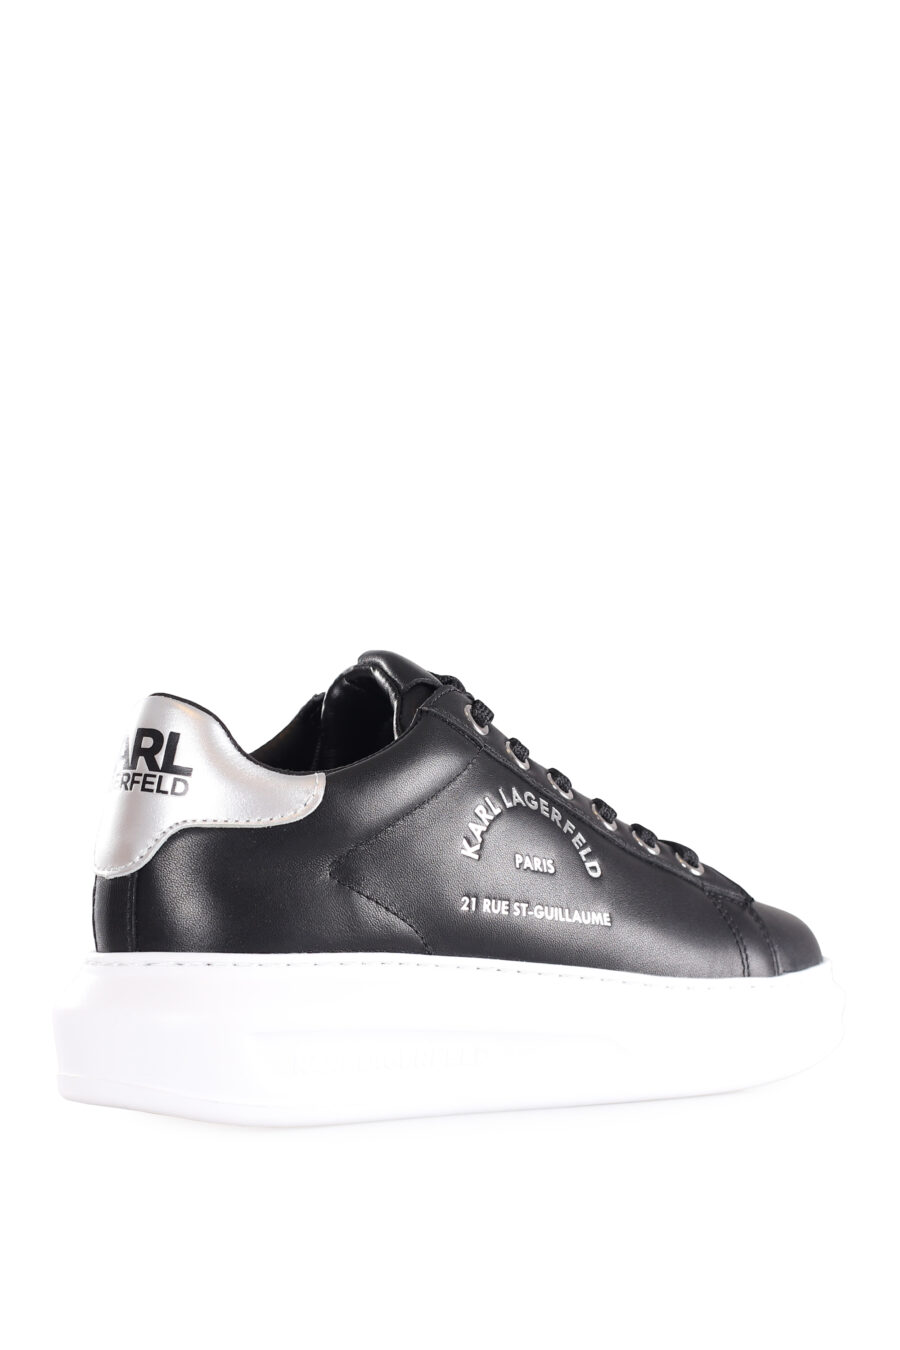 Black trainers with silver metal lettering logo - IMG 9567